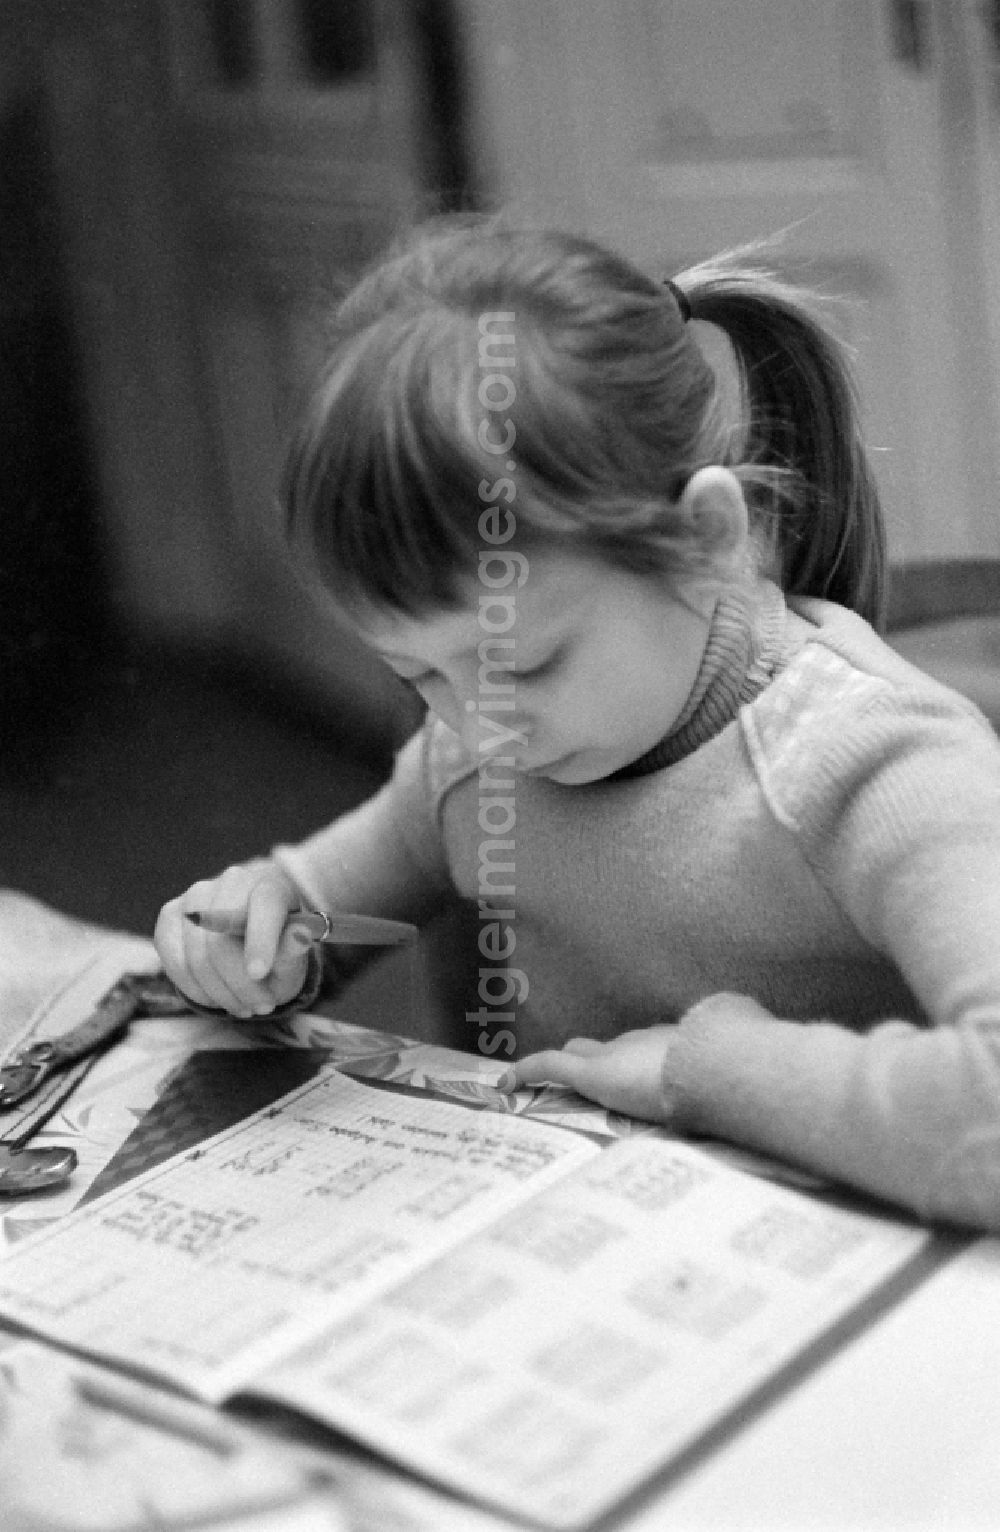 Berlin: A young girl is doing her homework in Berlin Eastberlin on the territory of the former GDR, German Democratic Republic